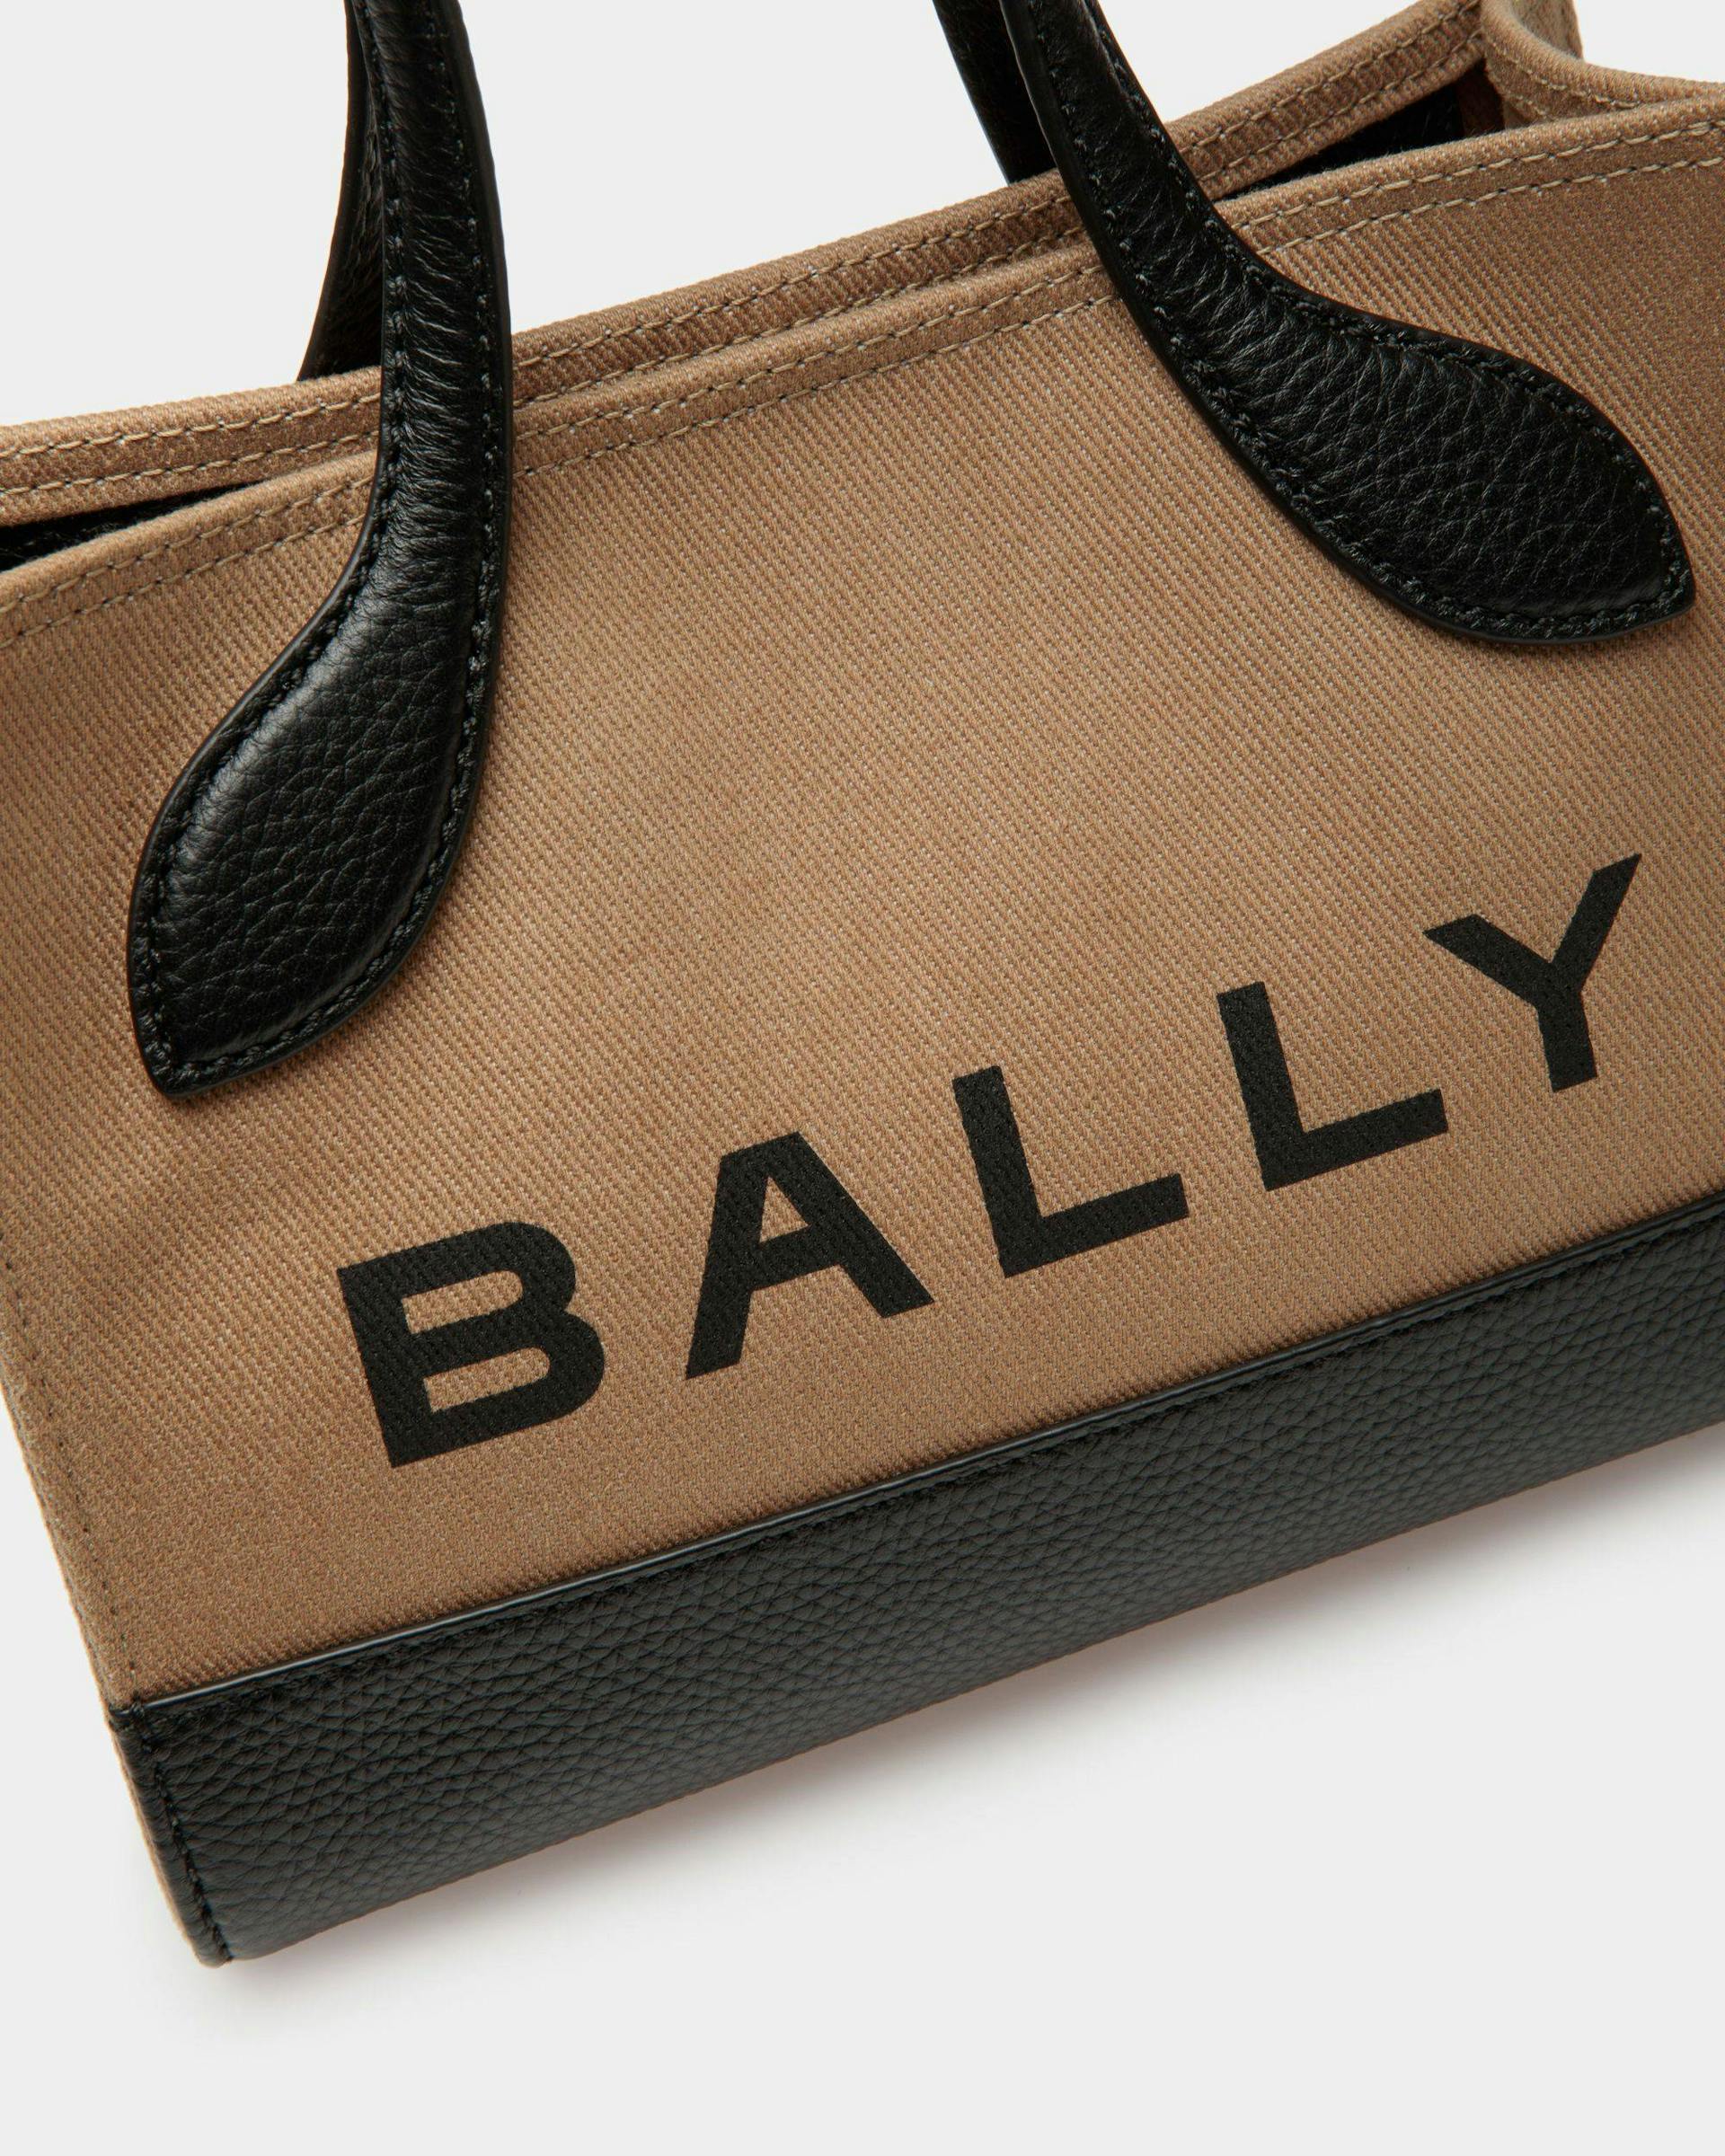 Bar Minibag In Sand And Black Fabric - Women's - Bally - 05